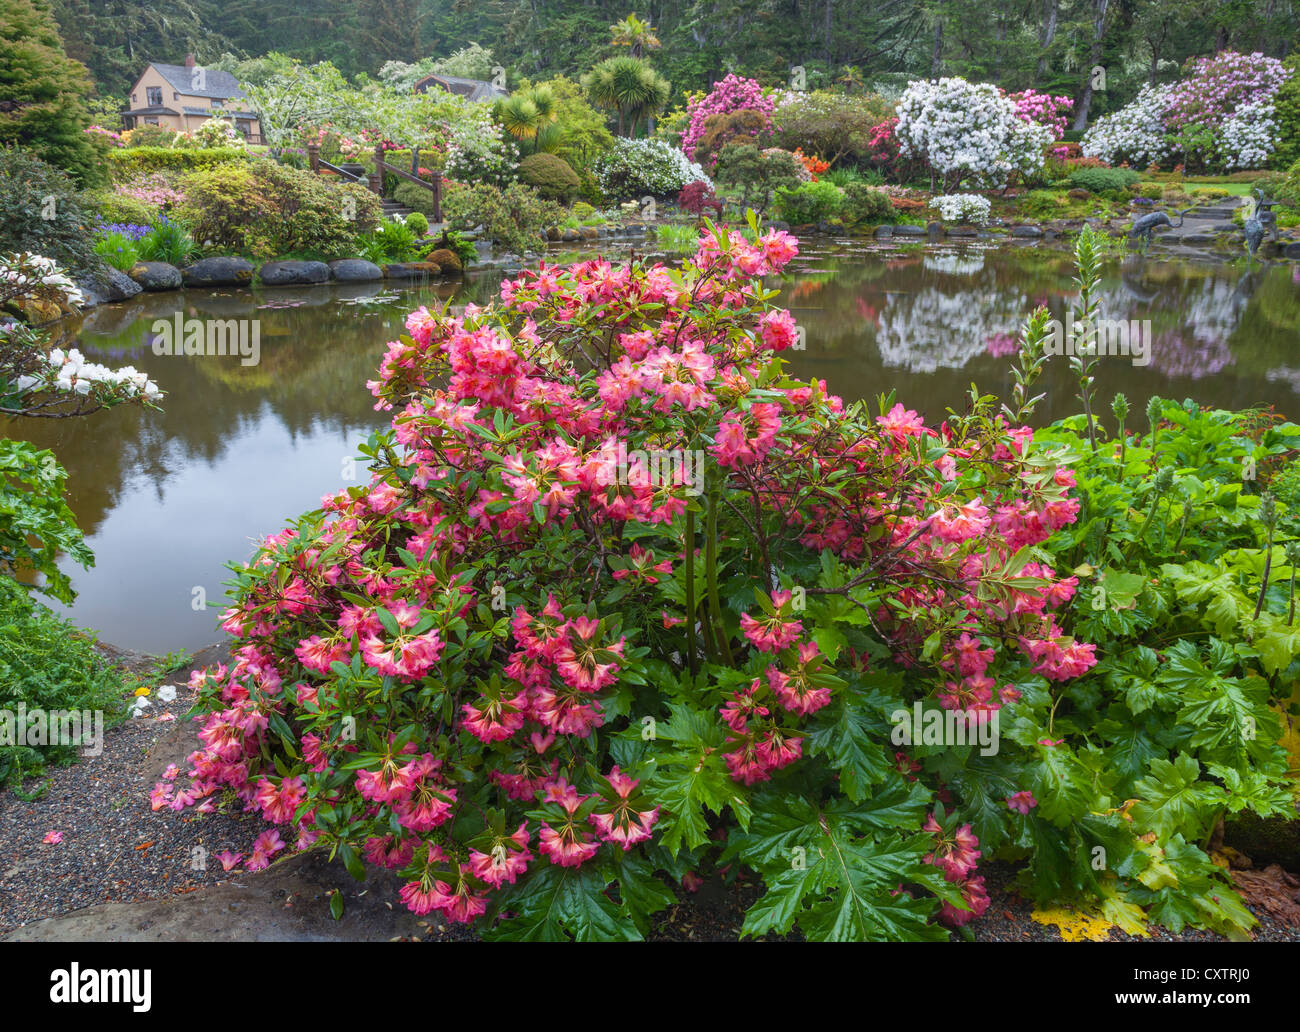 Shore Acres State Park, OR: Rhododendron 'Golden Gate' blooming by the pond at the Simpson Estate Garden in spring. Stock Photo